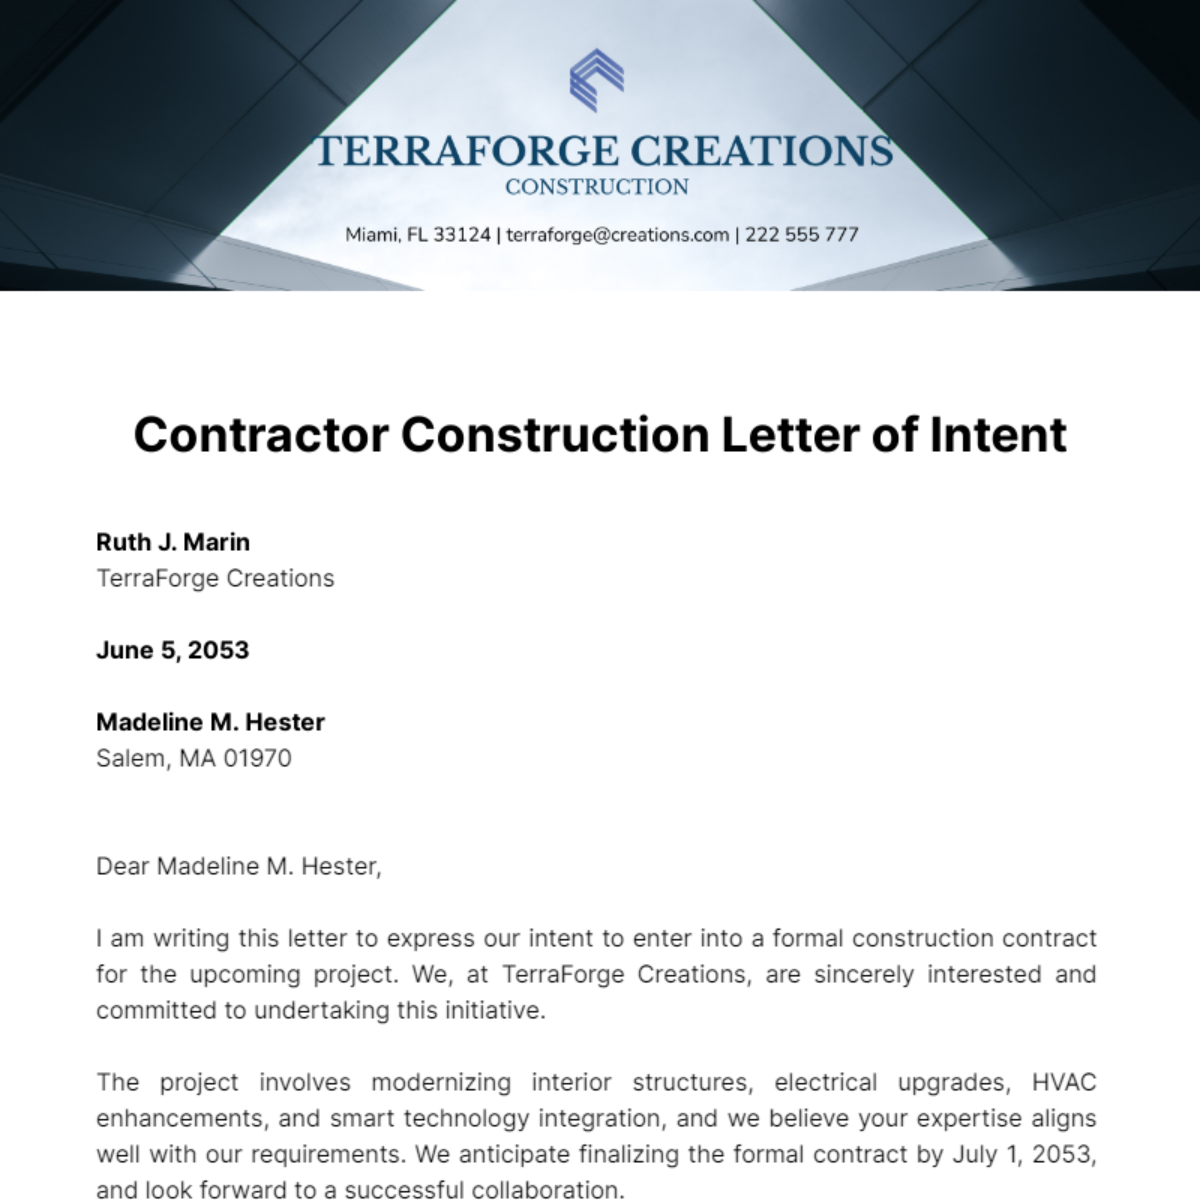 Contractor Construction Letter of Intent Template